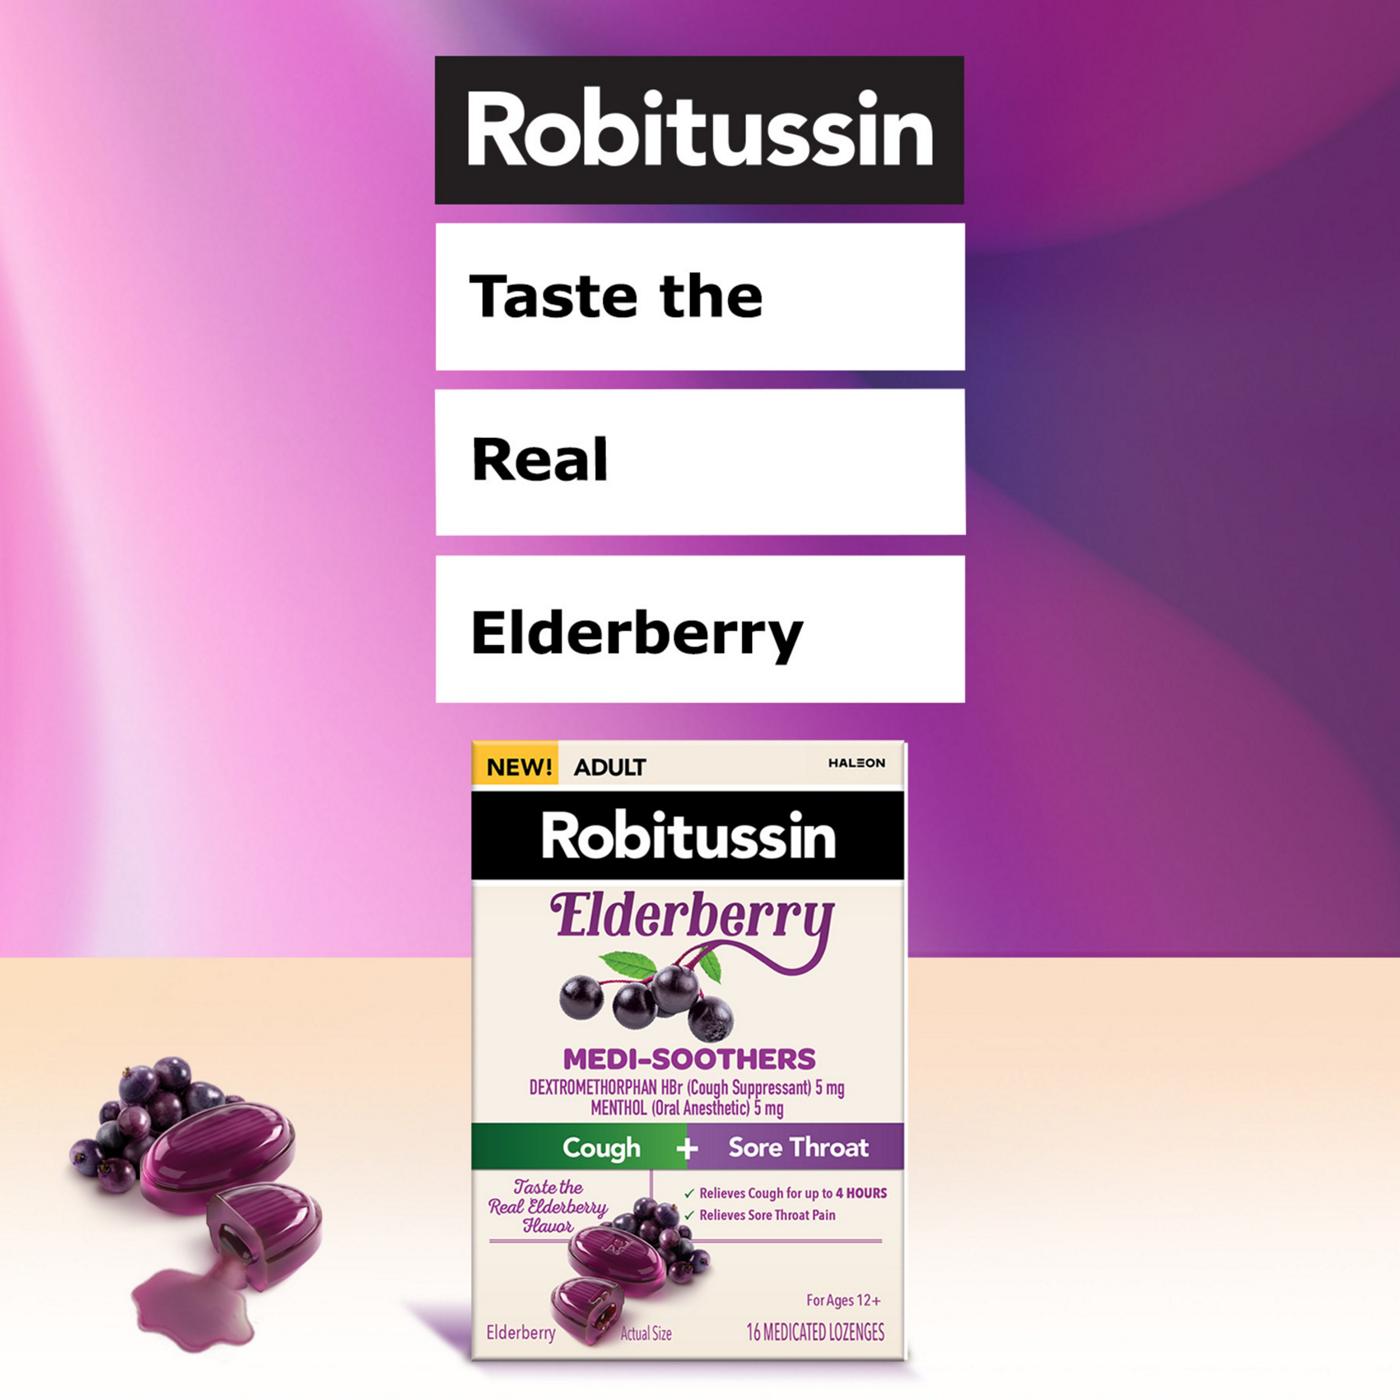 Robitussin Medi-Soothers Cough + Throat Elderberry Lozenges; image 7 of 7